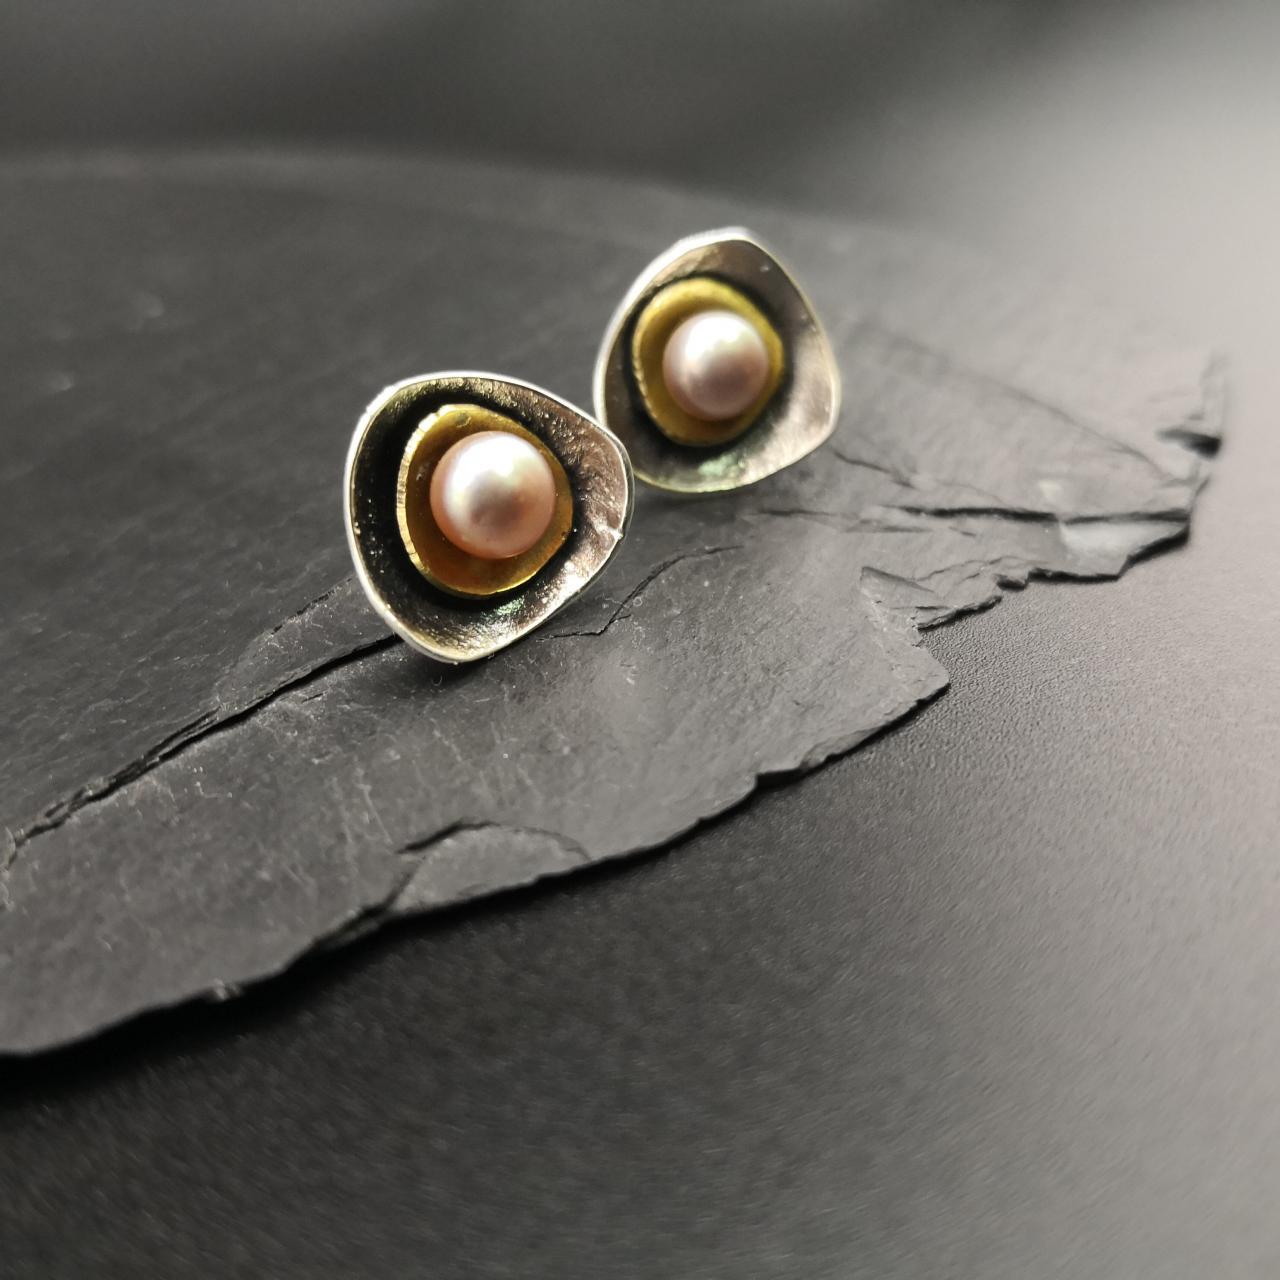 Modern Pink Pearl Stud Earrings Edgy Silver Jewelry Unique Gifts Contemporary Industrial Design For Worman Mixed Metal Geometric Earrings